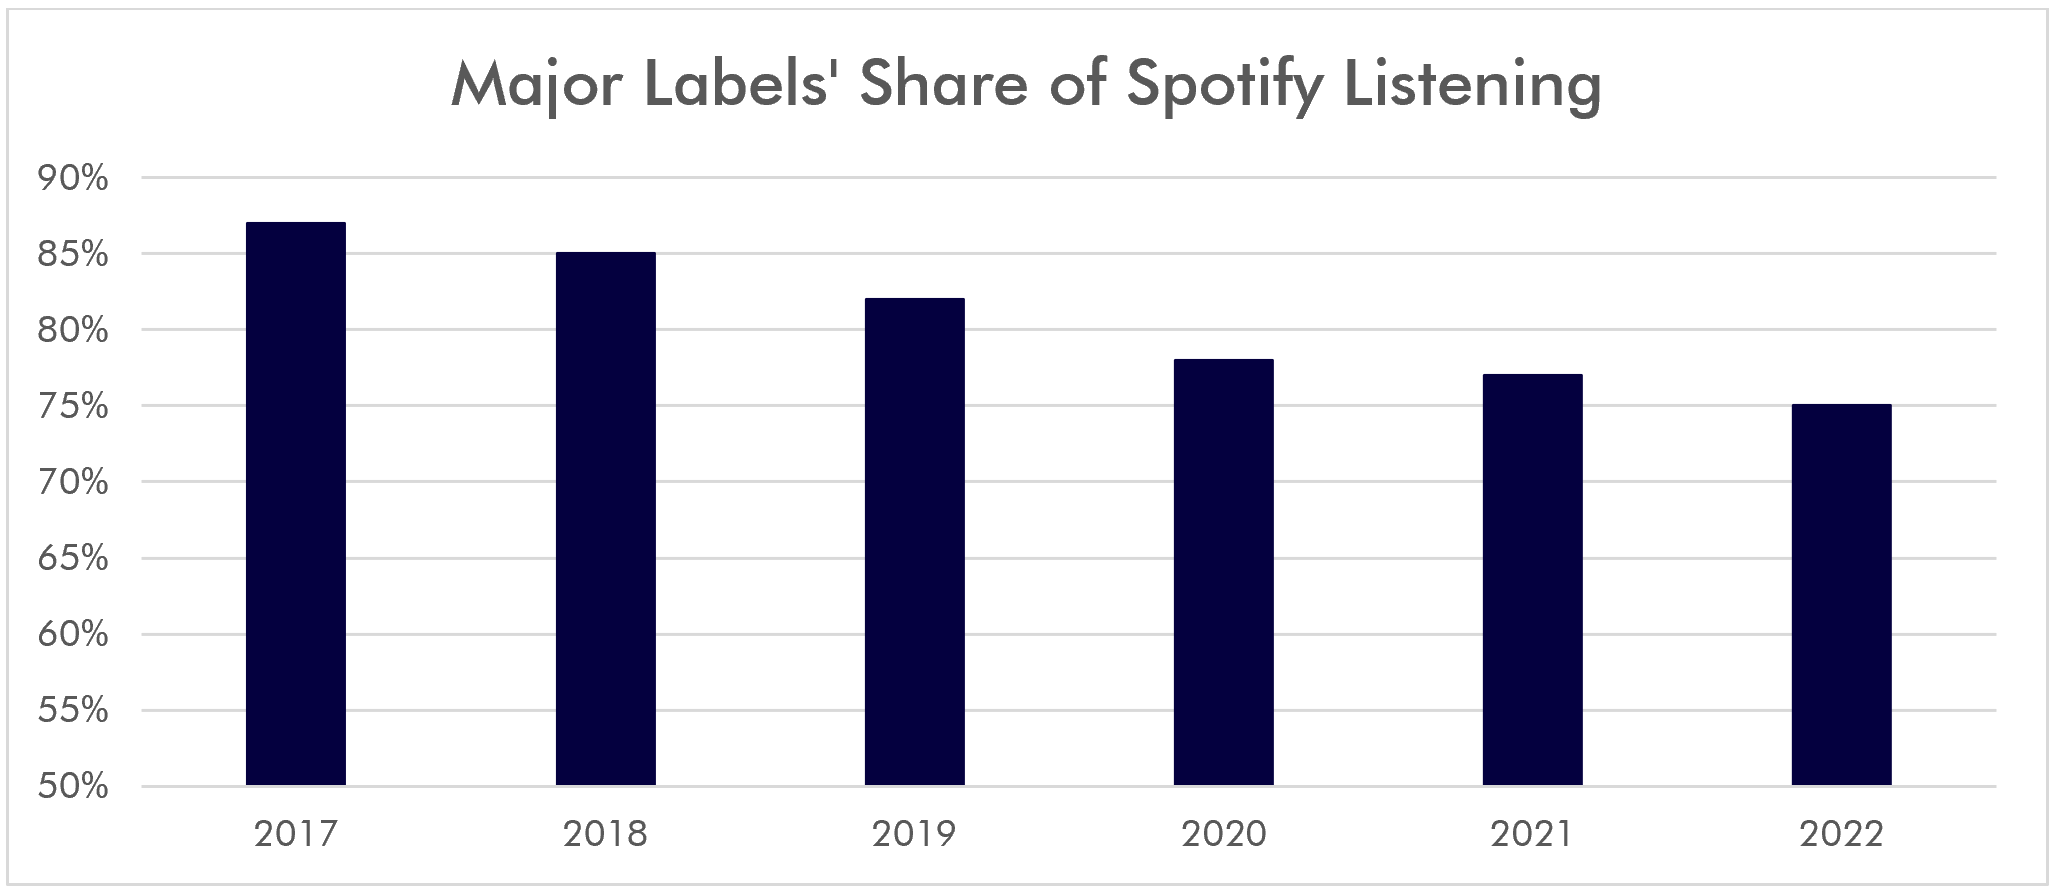 Major labels' share of Spotify listening